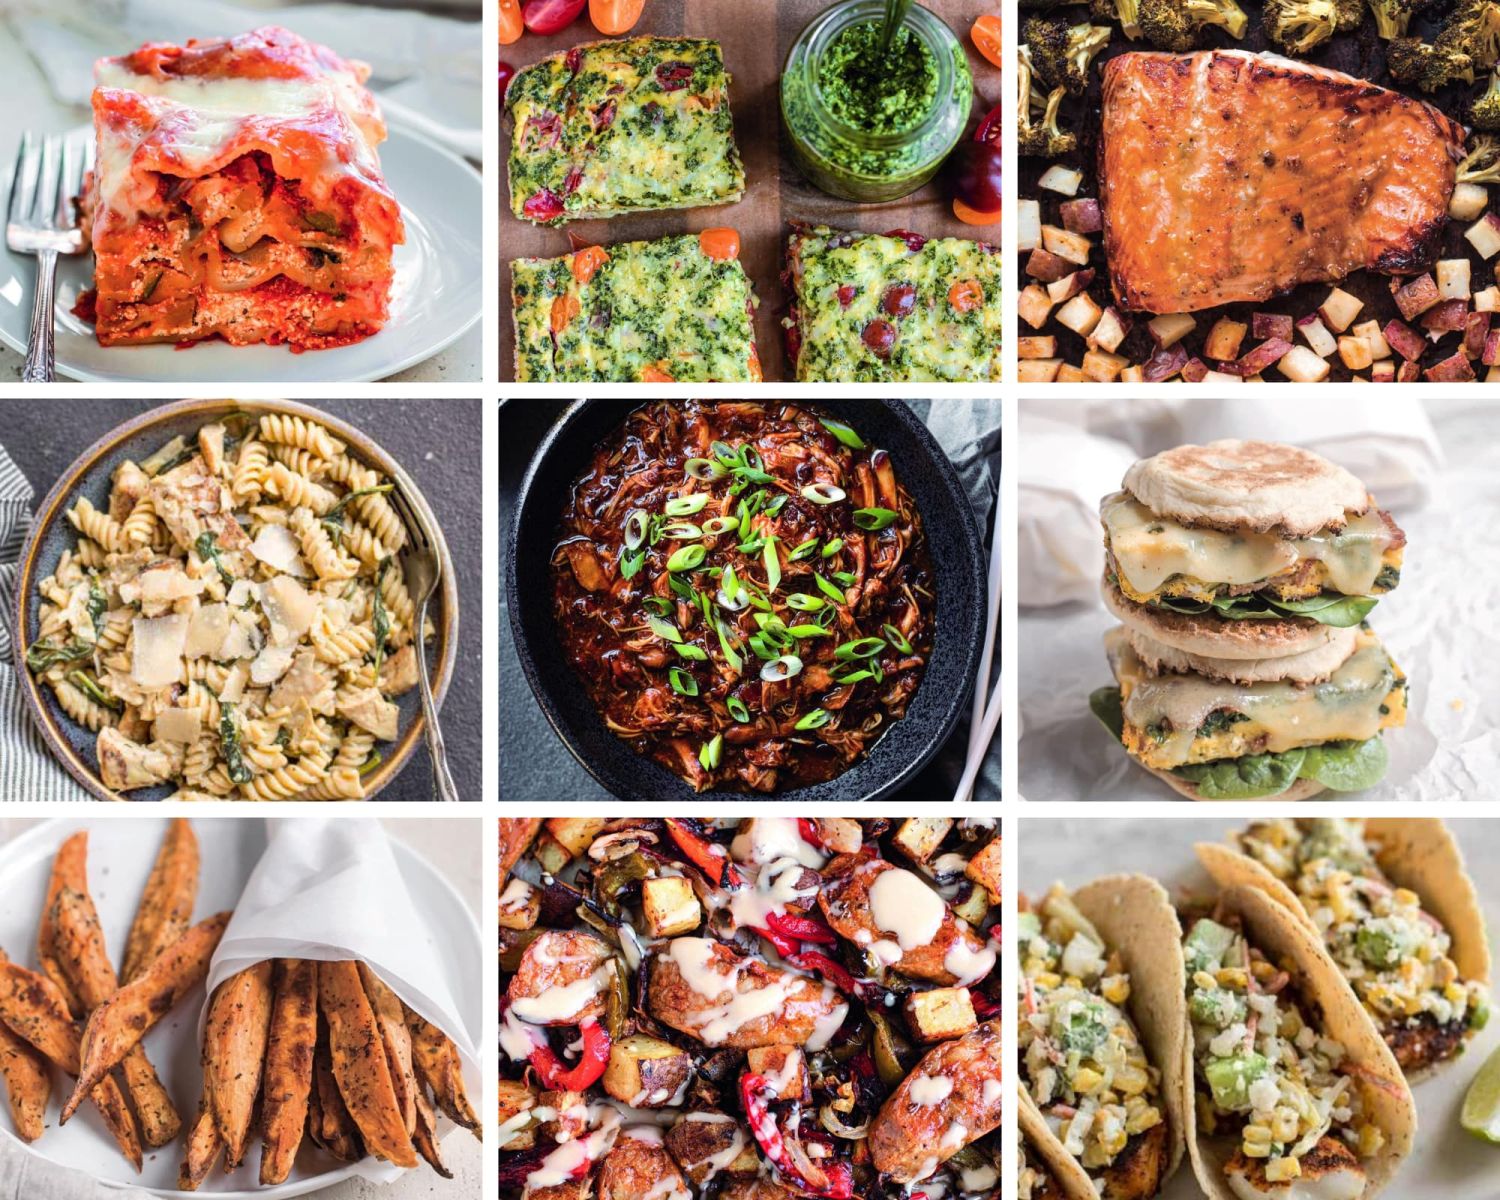 Cookbook preview photos including lasagna, egg sandwiches, pasta, and more.